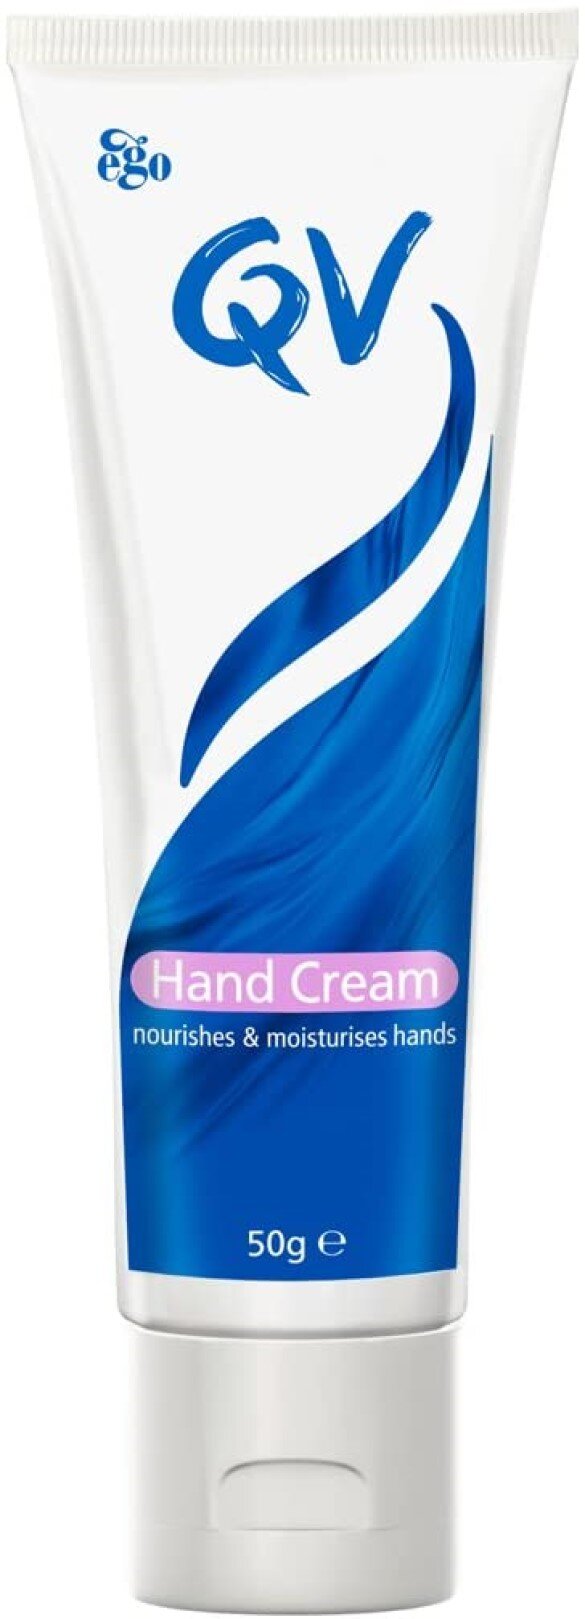 Ego QV Hand Cream 50g Nourishes and moisturises your hands